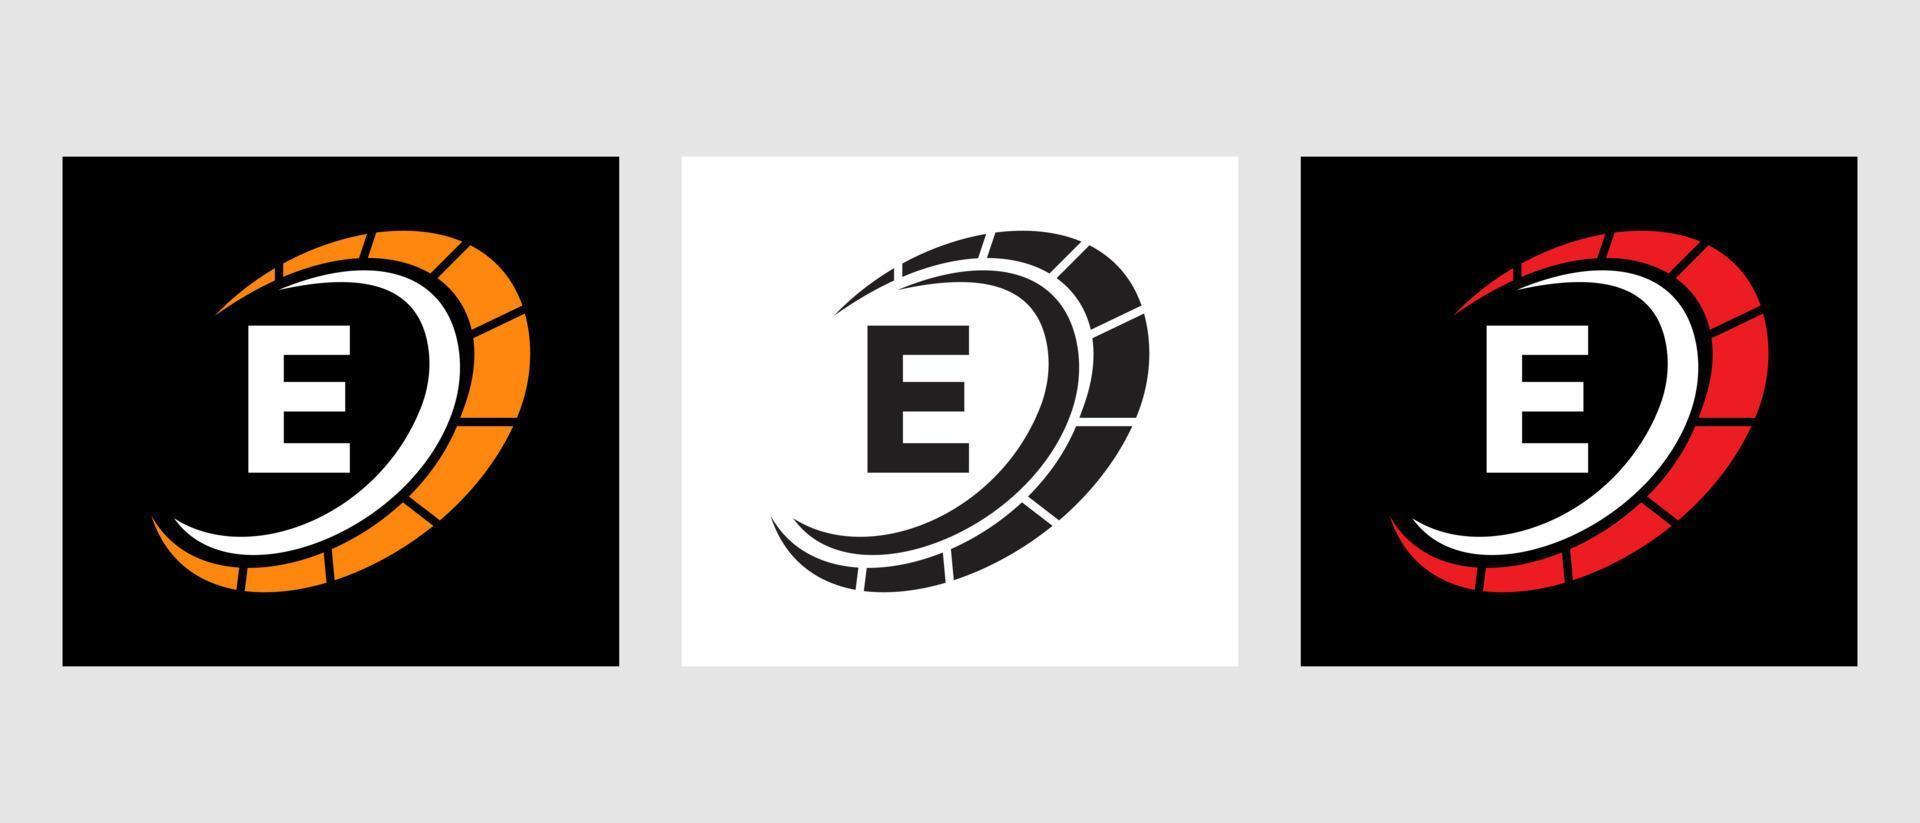 Letter E Car Automotive Logo For Cars Service, Cars Repair With Speedometer Symbol vector